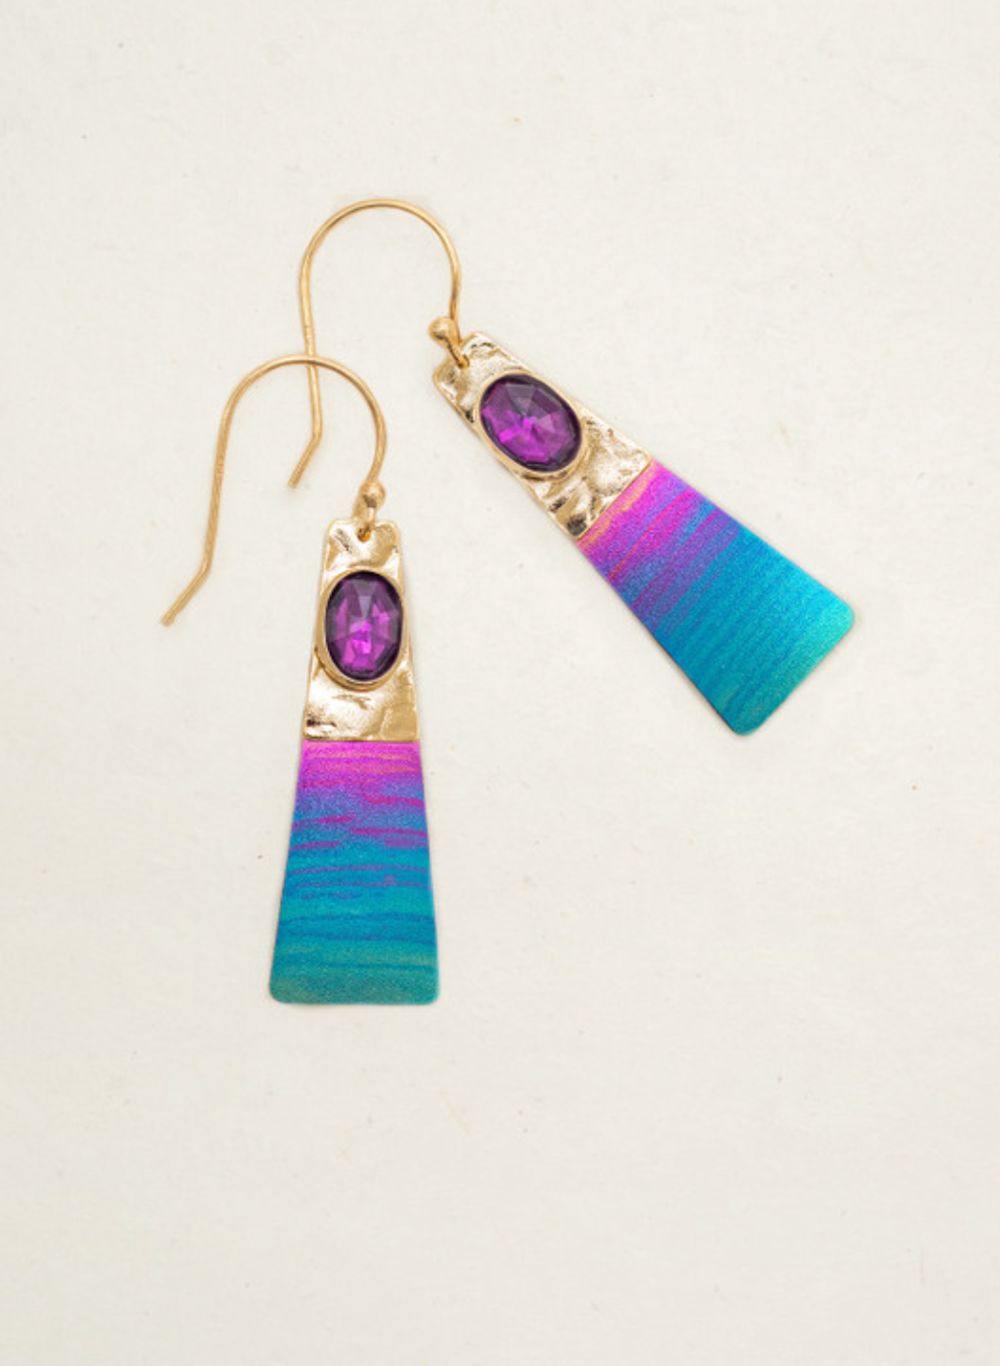 Regalia Earrings in Teal - Heart of the Home PA